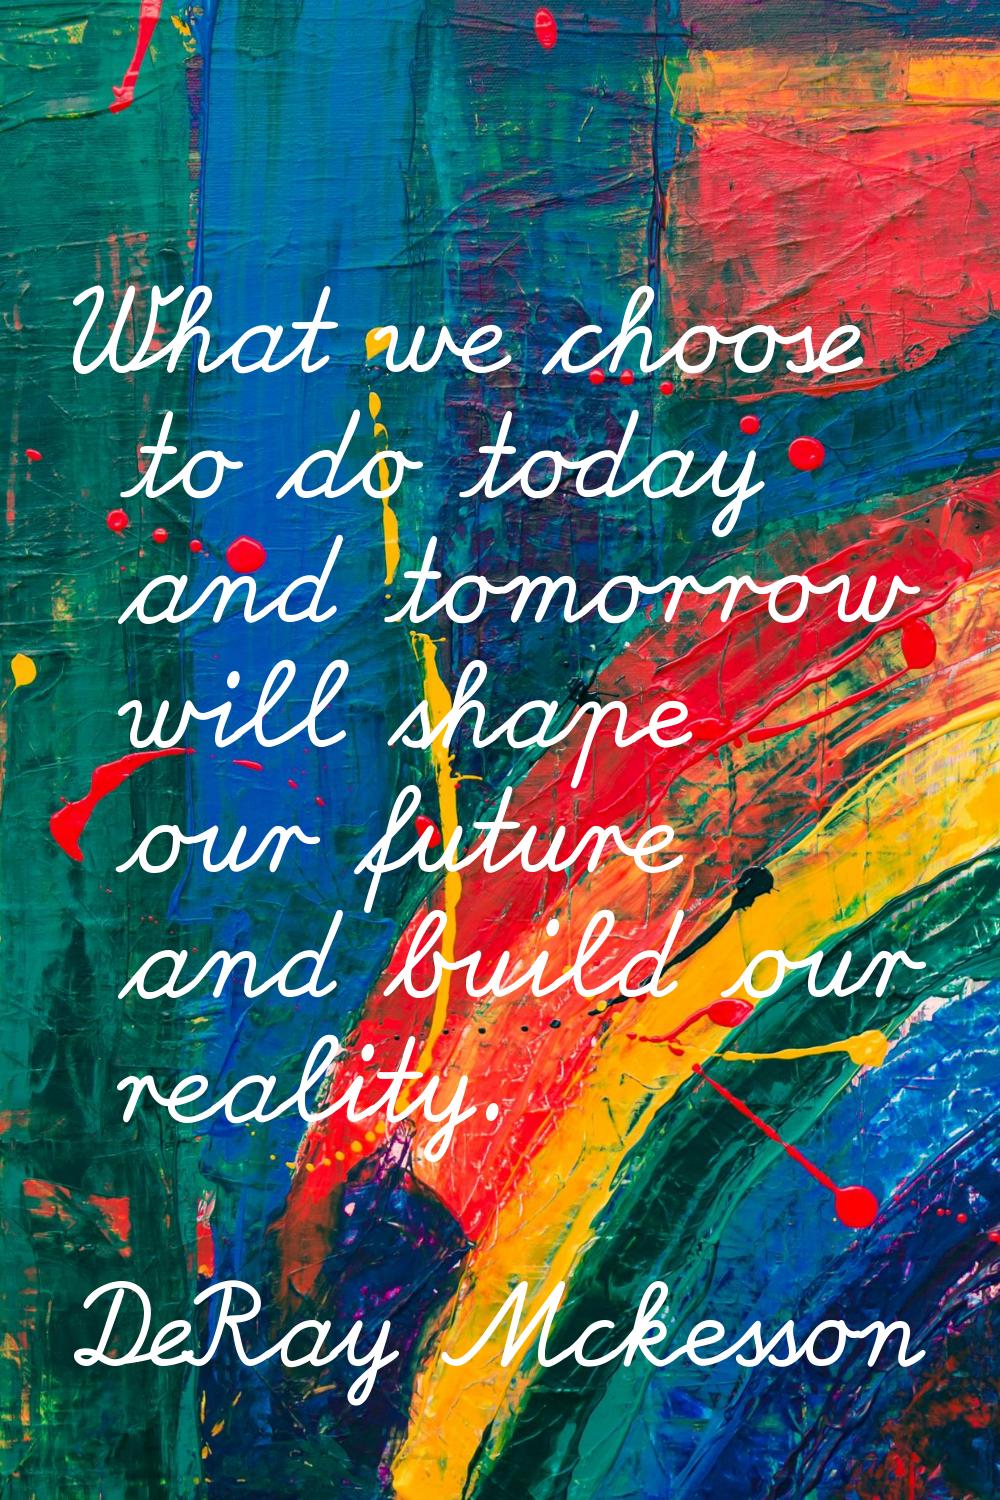 What we choose to do today and tomorrow will shape our future and build our reality.